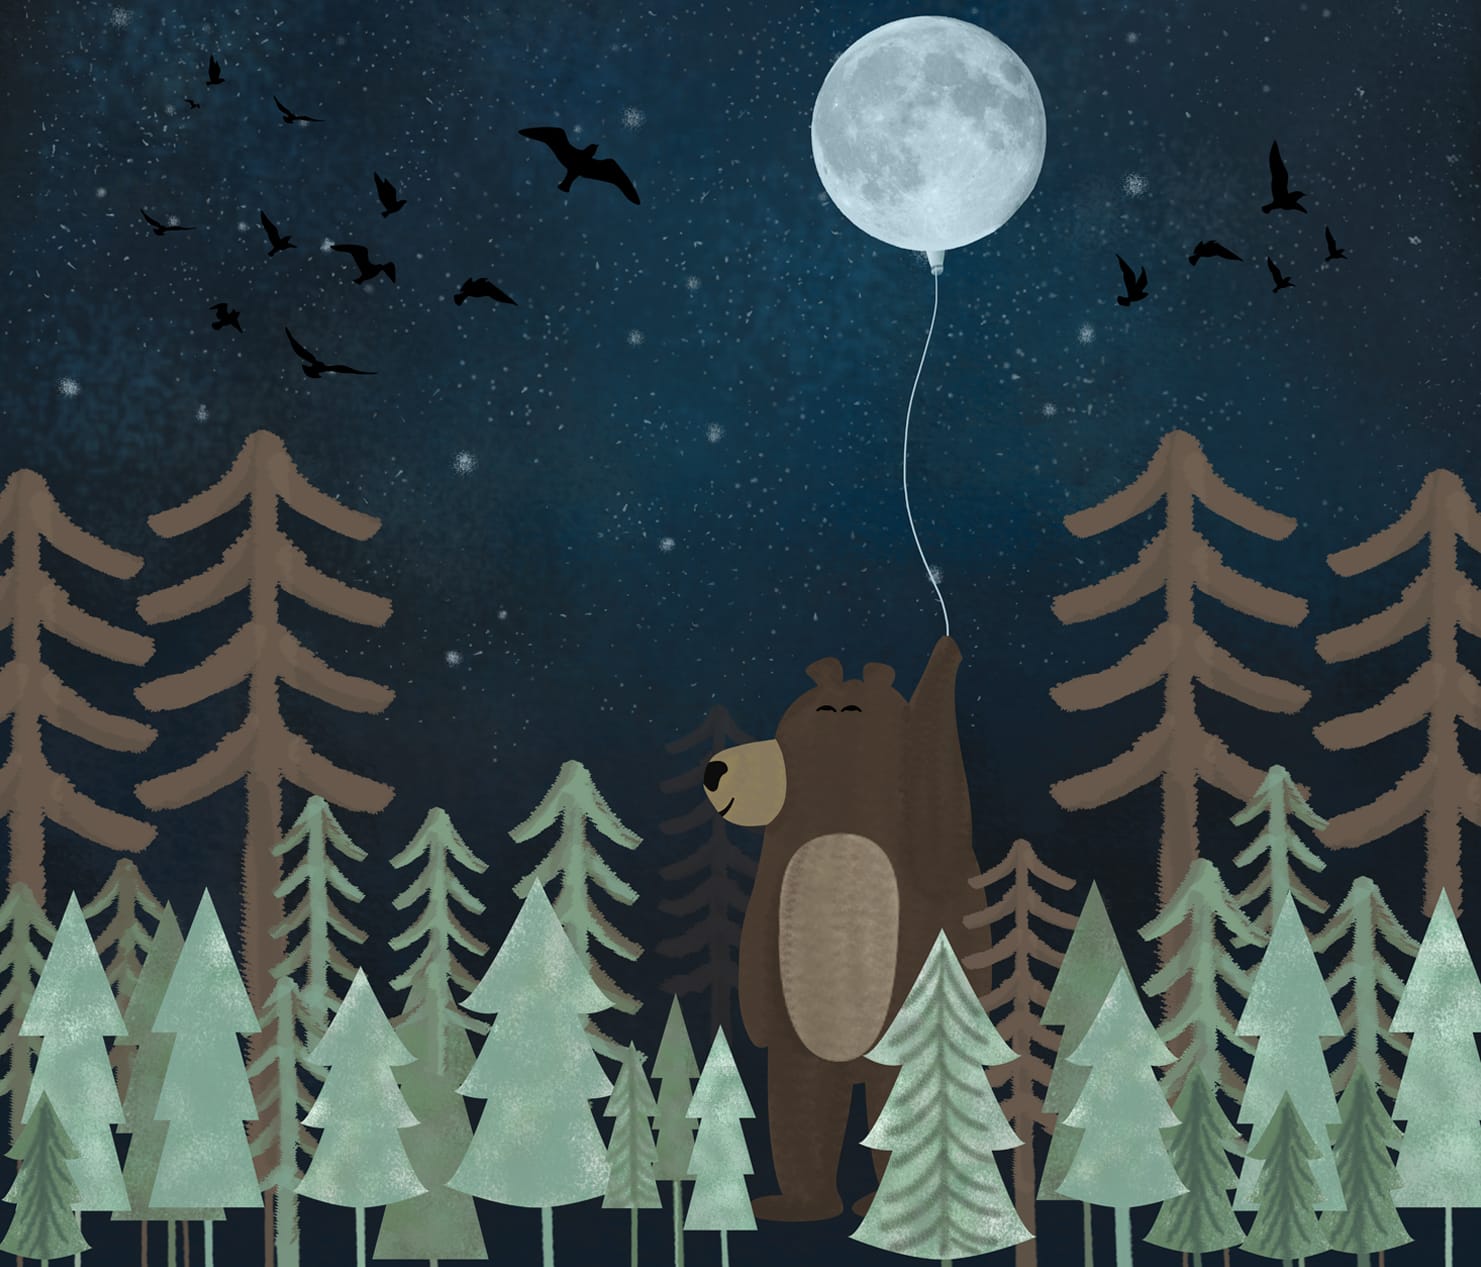 Jungle Theme Giant Bear, Nightscape With Glittery Stars, mural for kids room, Customised